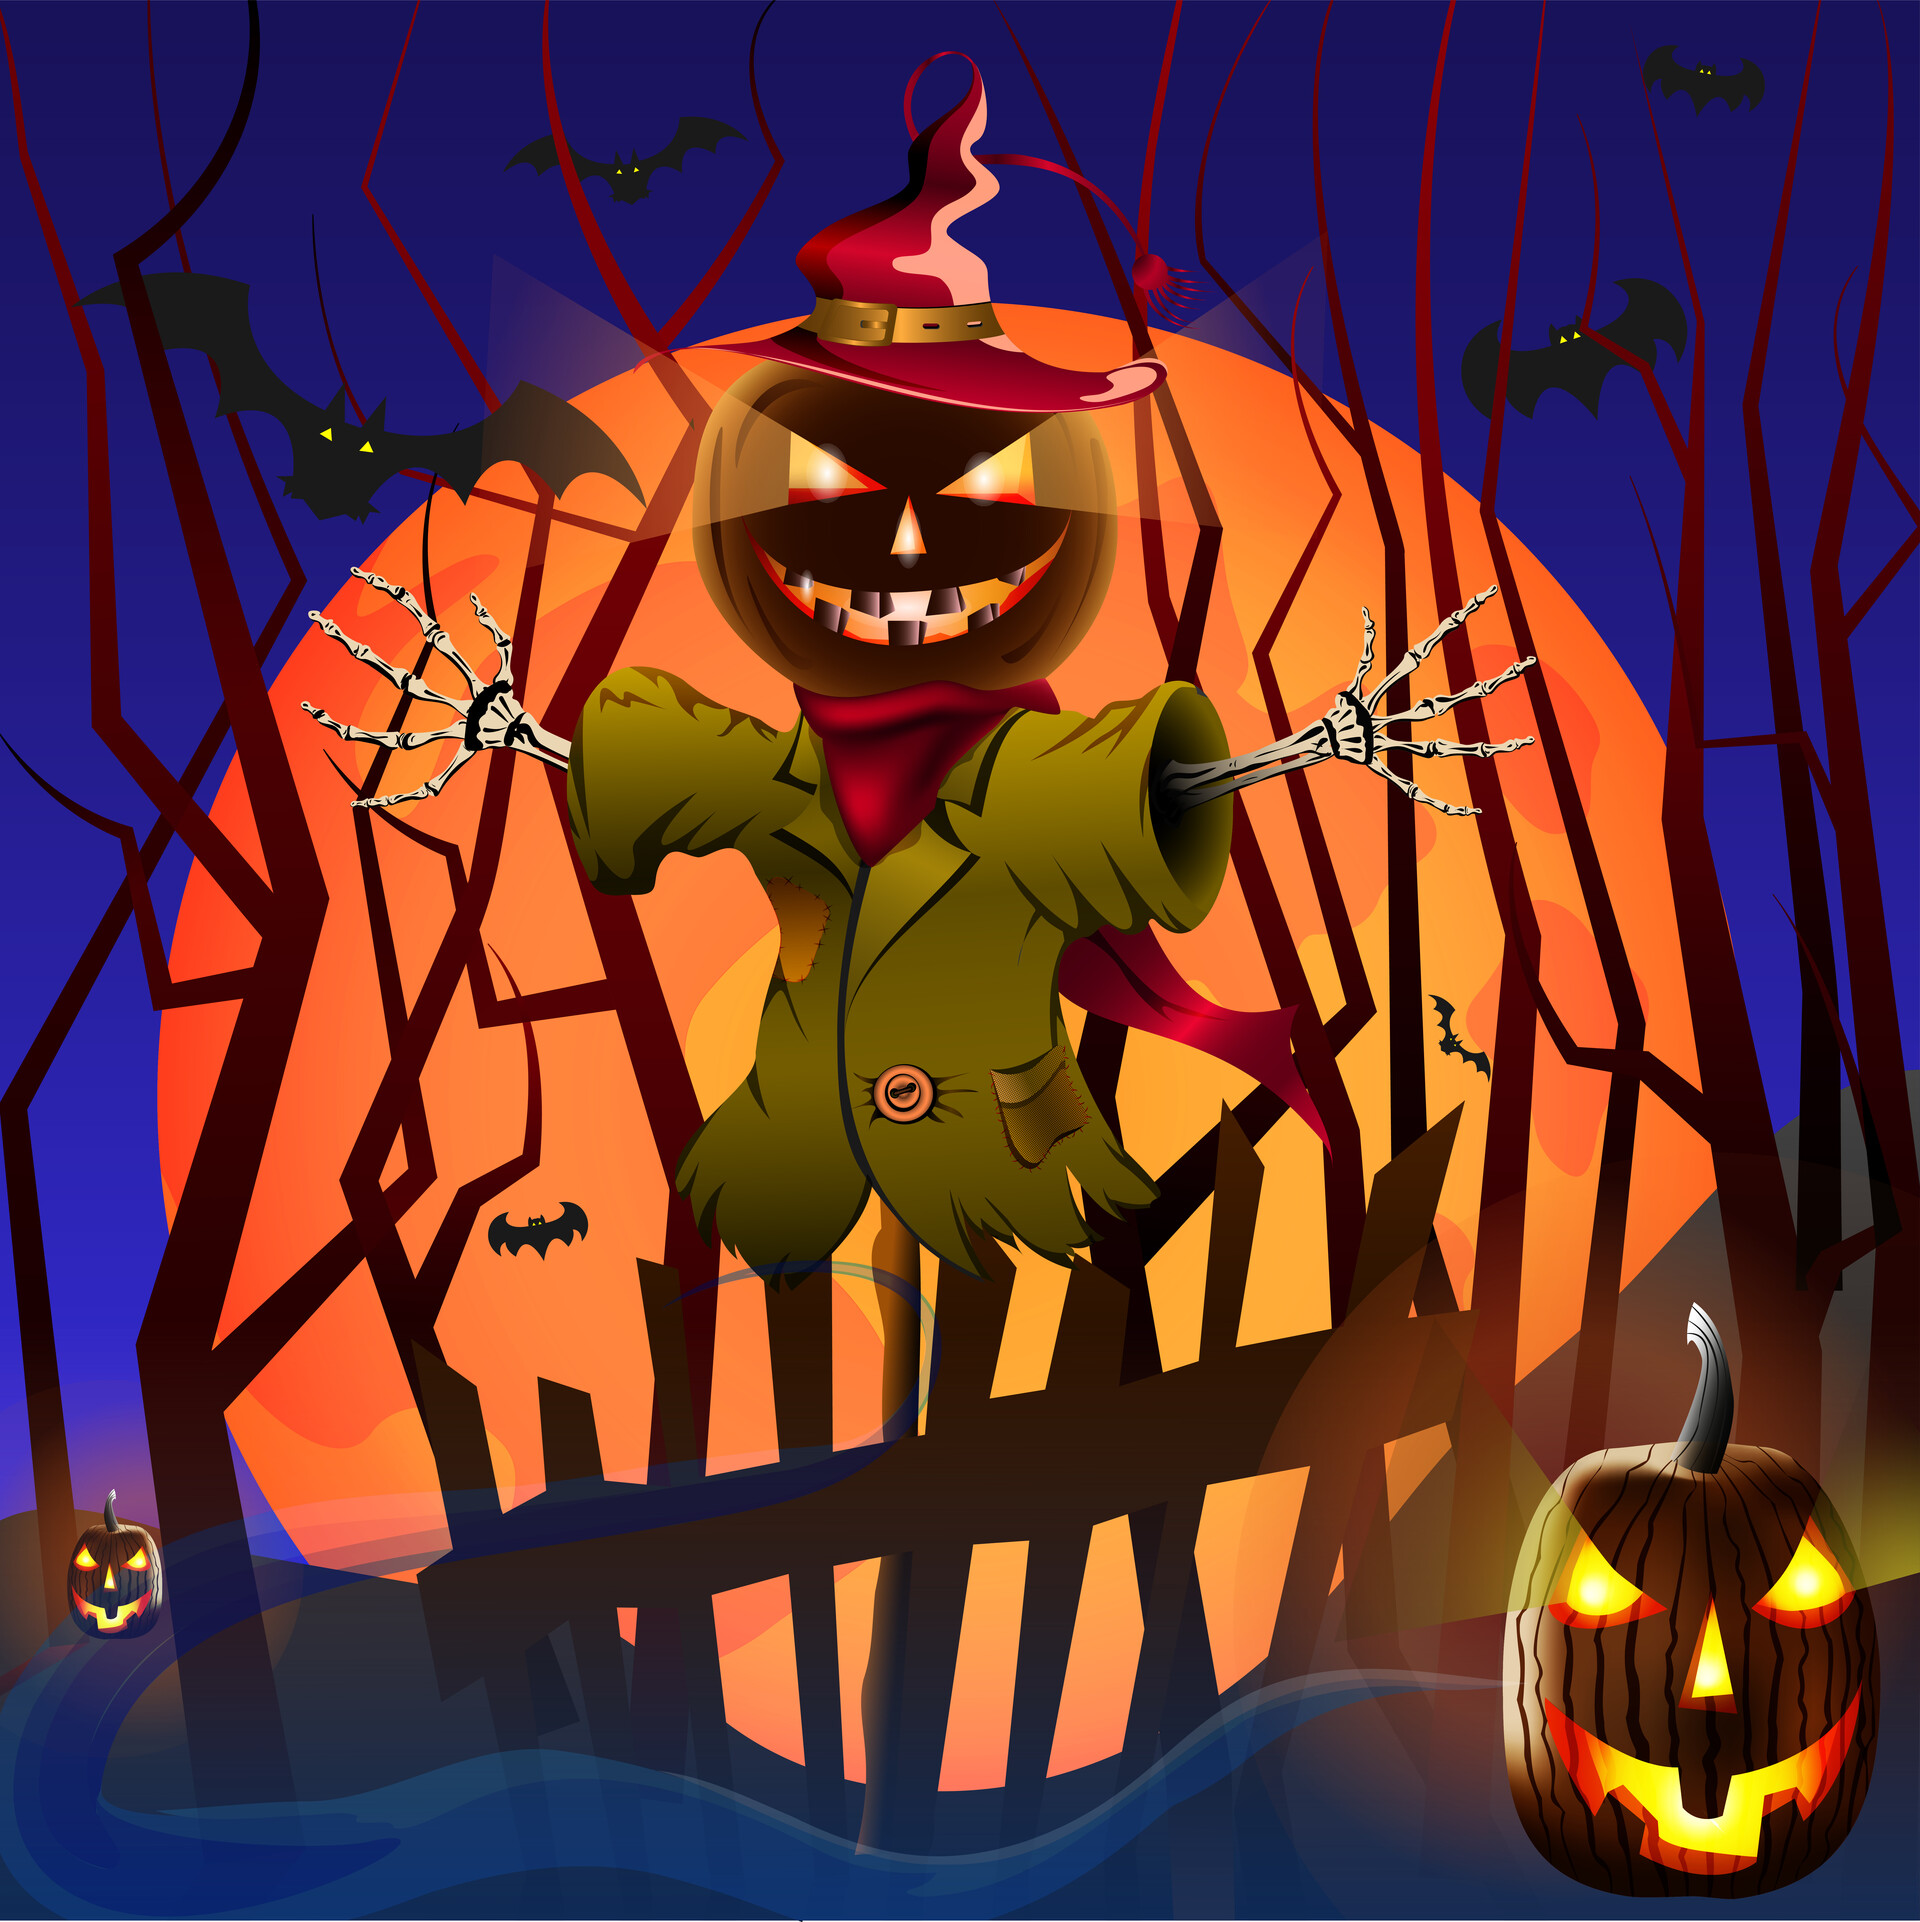 ArtStation - Halloween scarecrow from a pumpkin behind a fence.